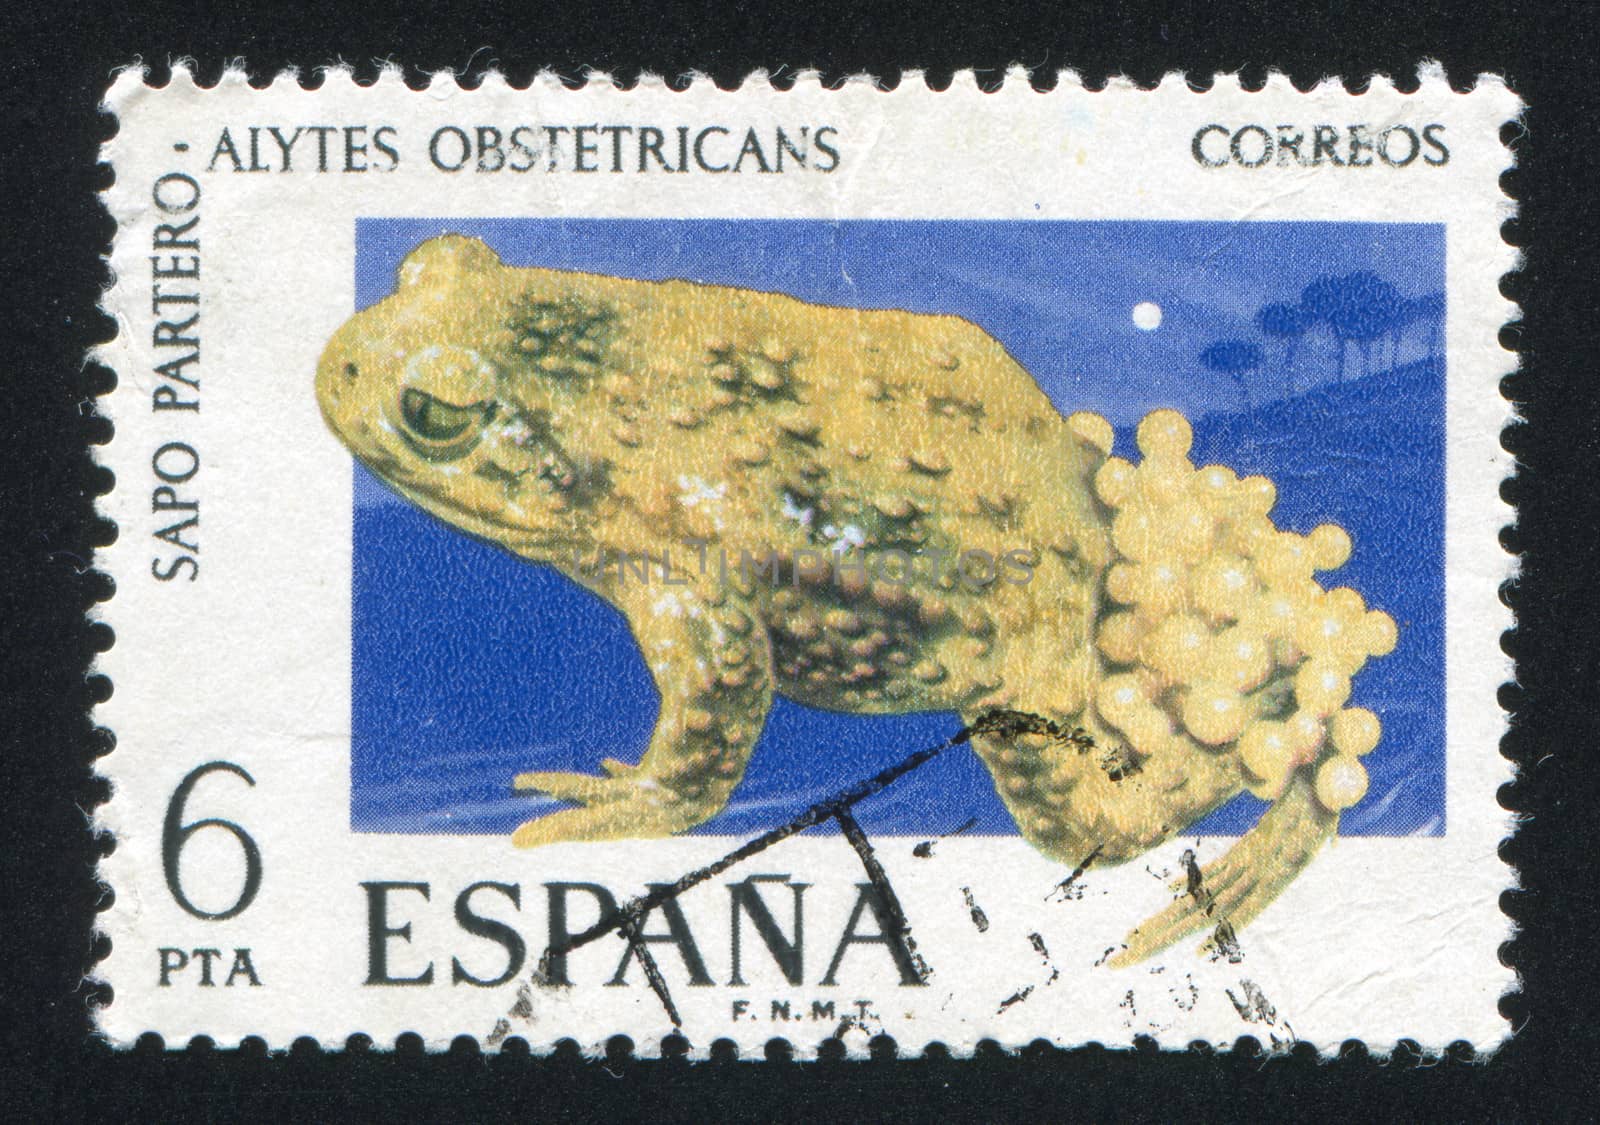 SPAIN - CIRCA 1975: stamp printed by Spain, shows Midwife Toad, circa 1975